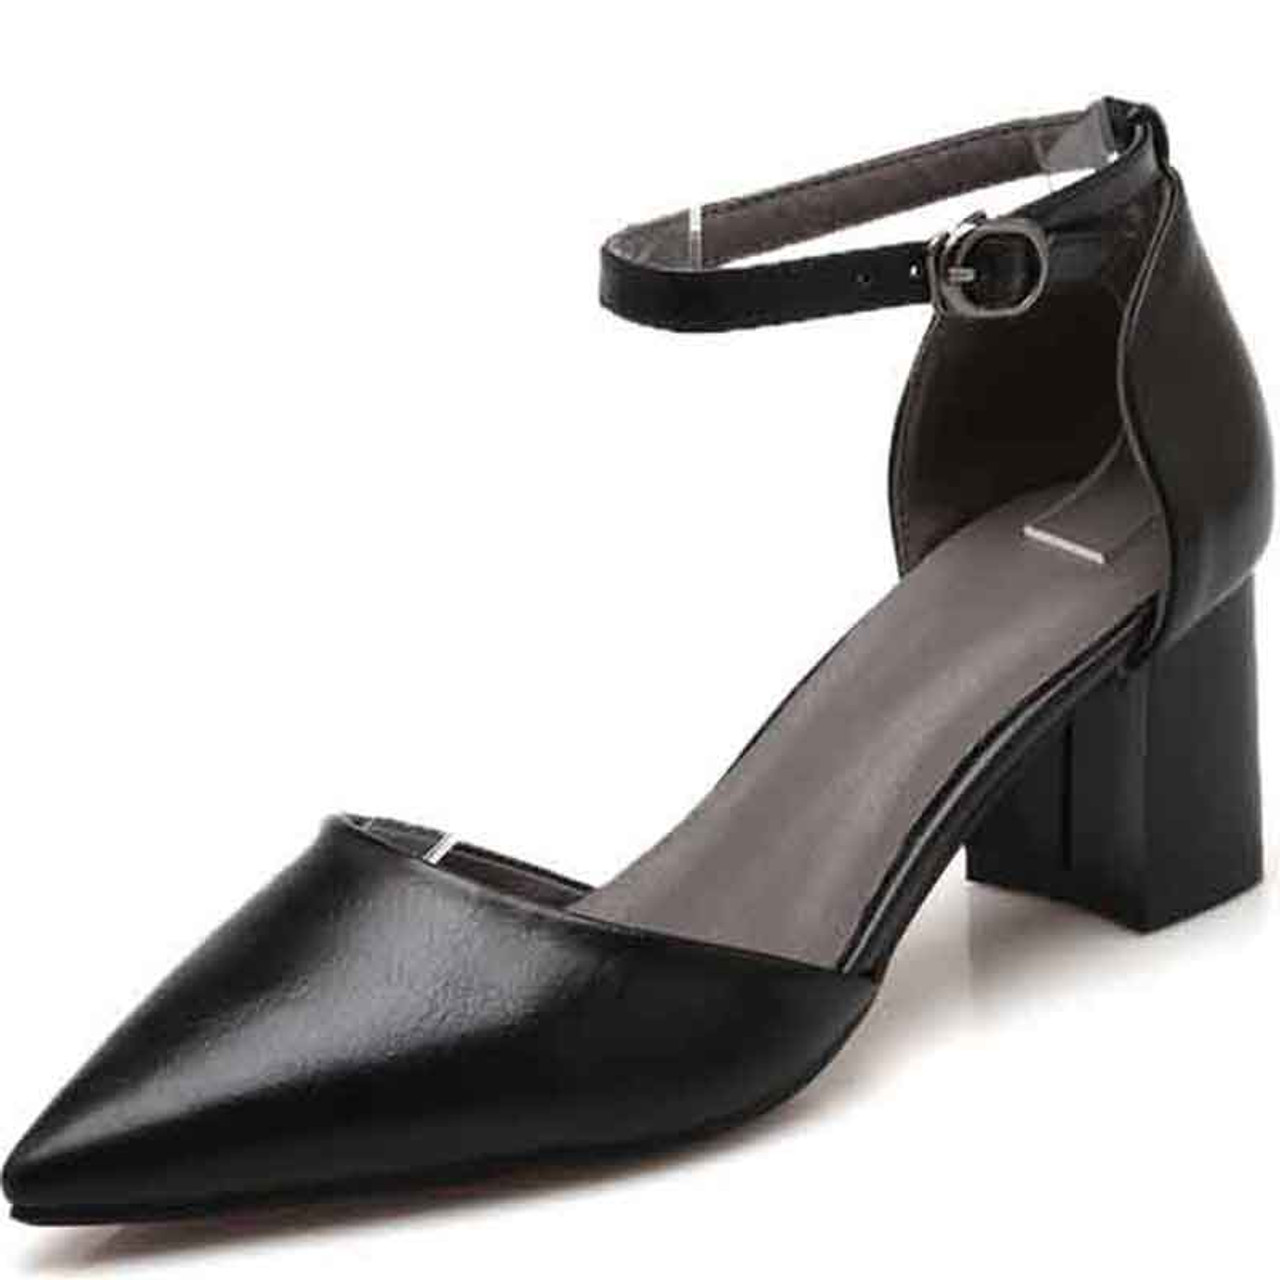 black leather ankle strap shoes